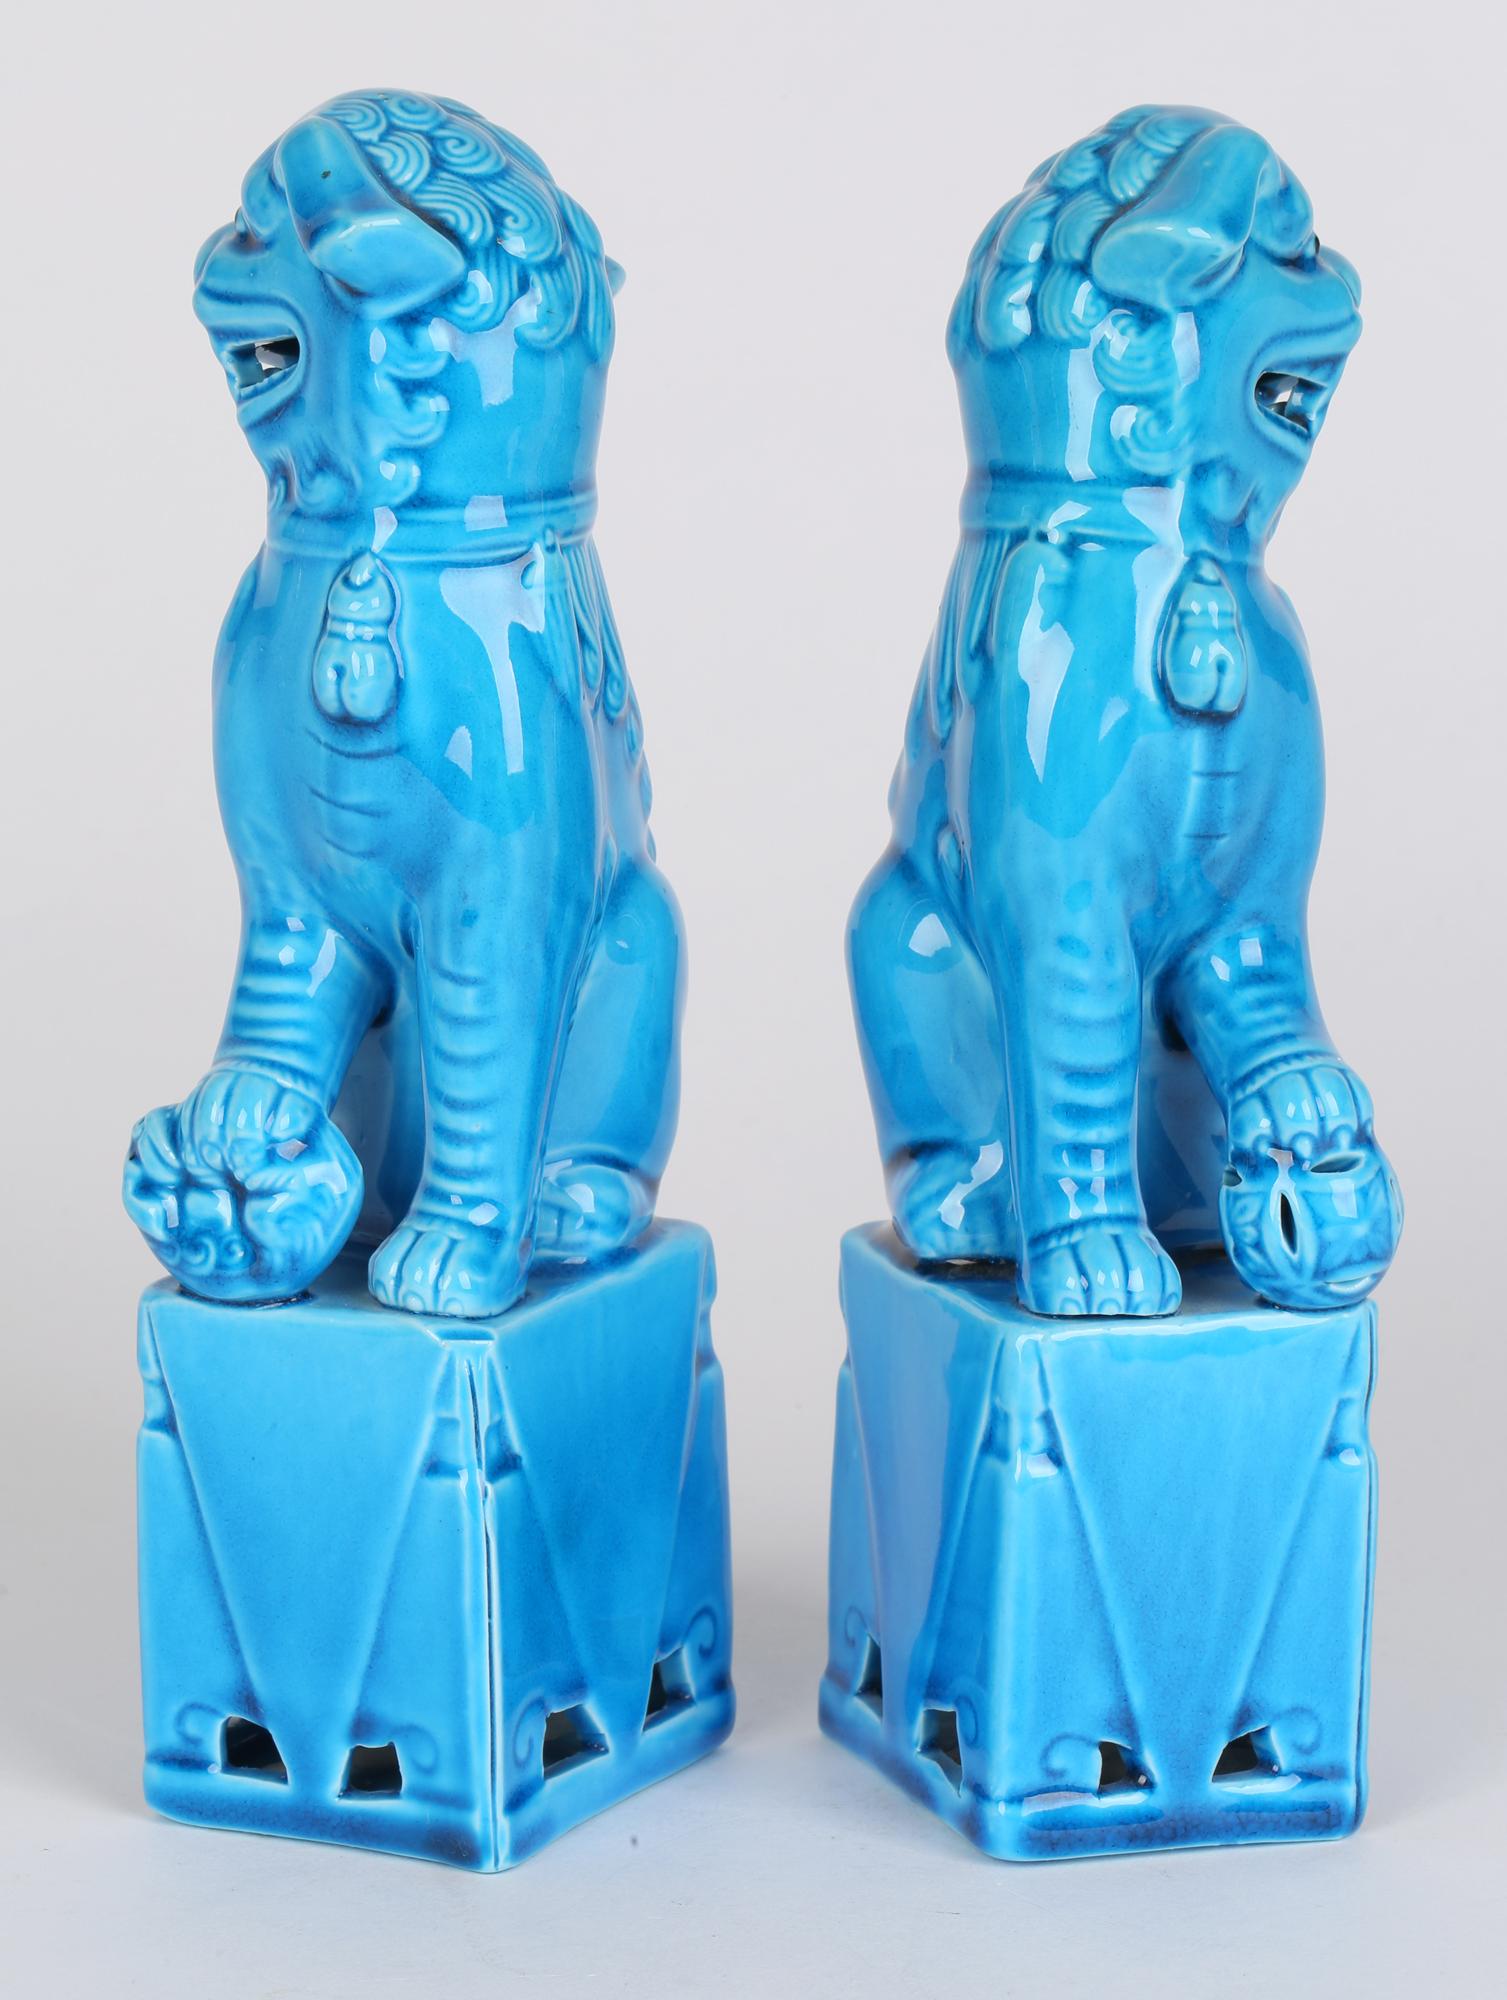 A very fine and attractive pair of Chinese turquoise glazed dogs of foo figures dating from the first half of the 20th century. The hollow biscuit porcelain figures stand raised on a rectangular base and are looking sideways with open mouths showing